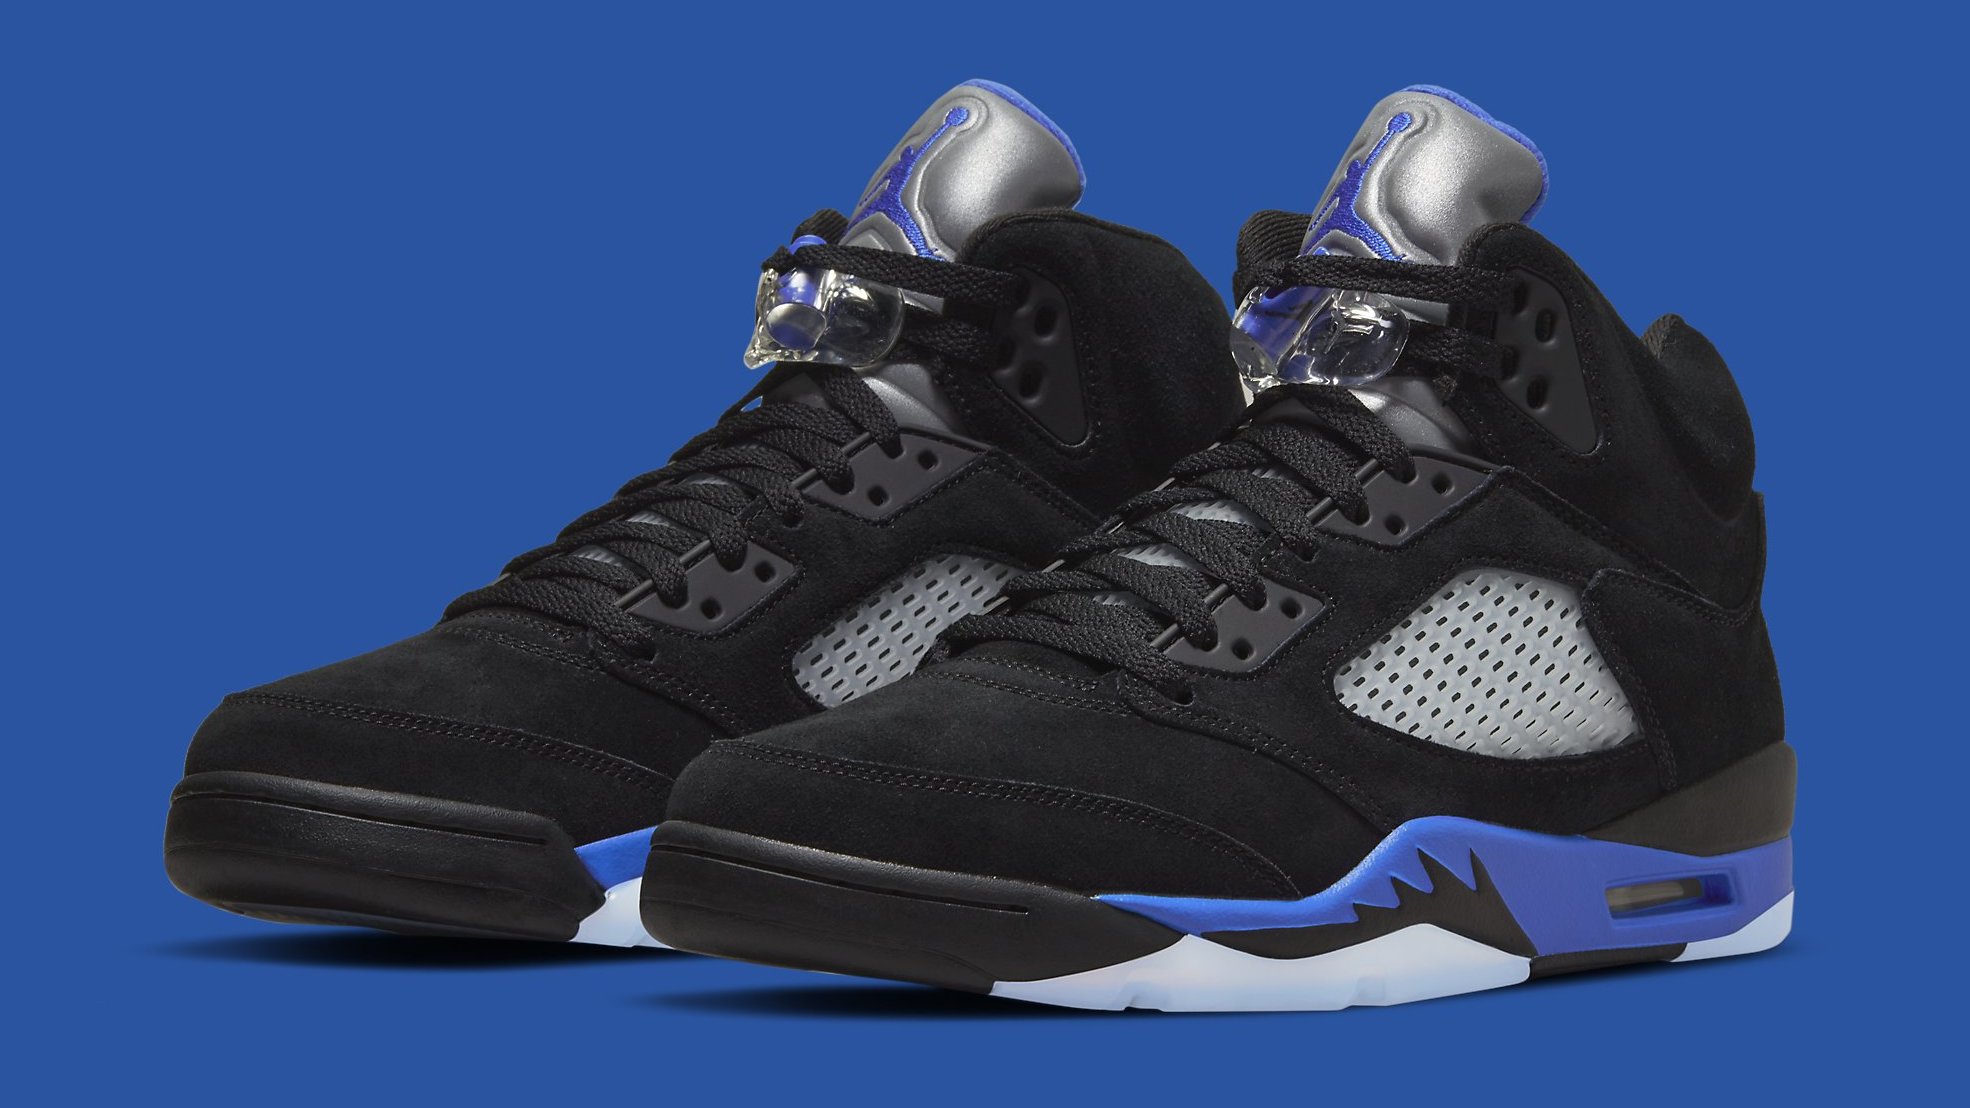 black and blue jordans coming out